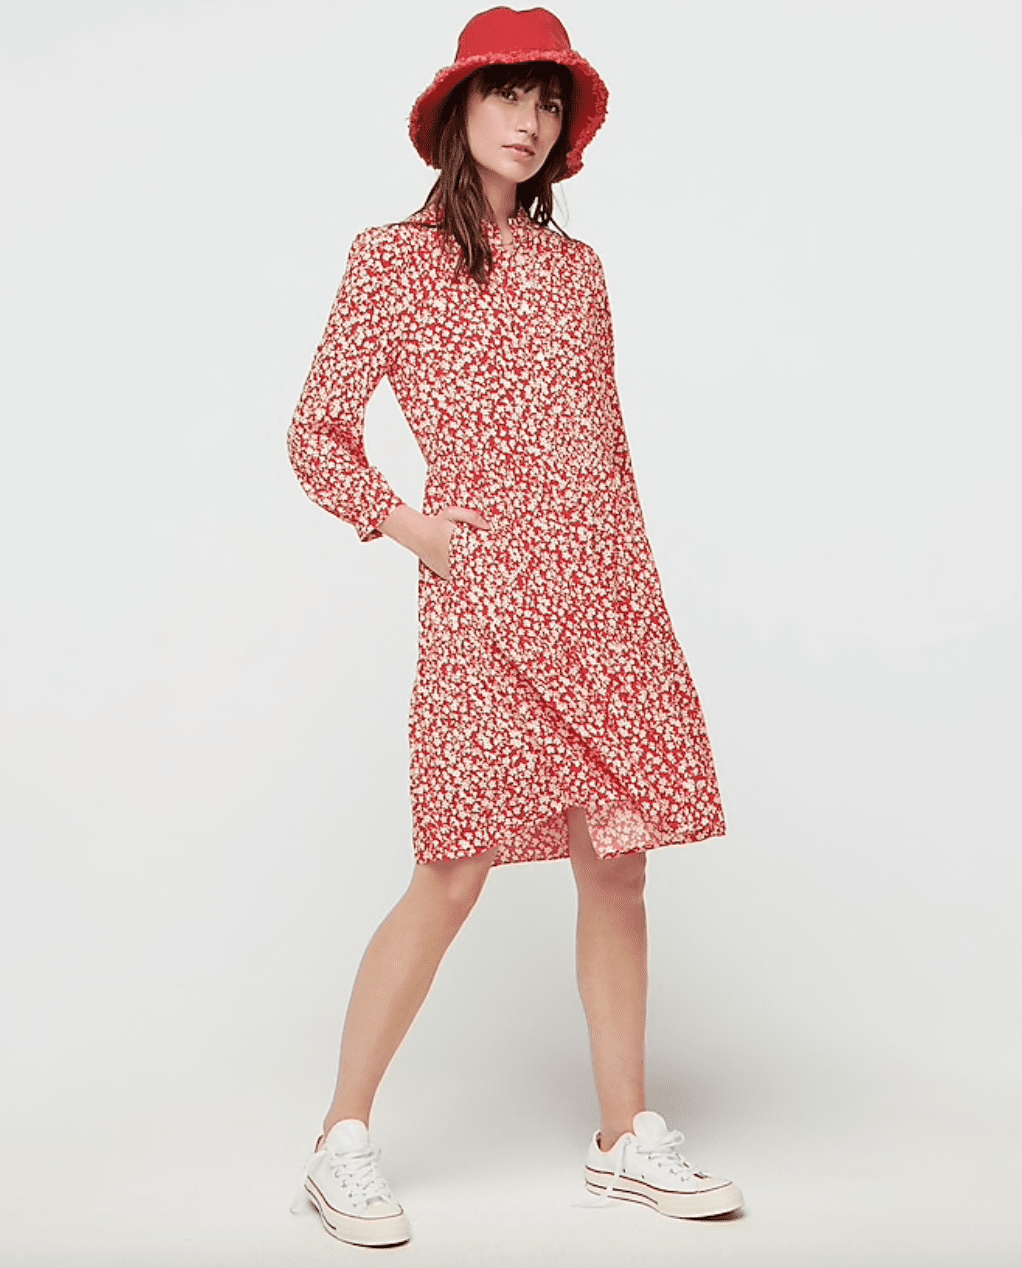 J Crew Shirtdress in Tossed Bouquet Print